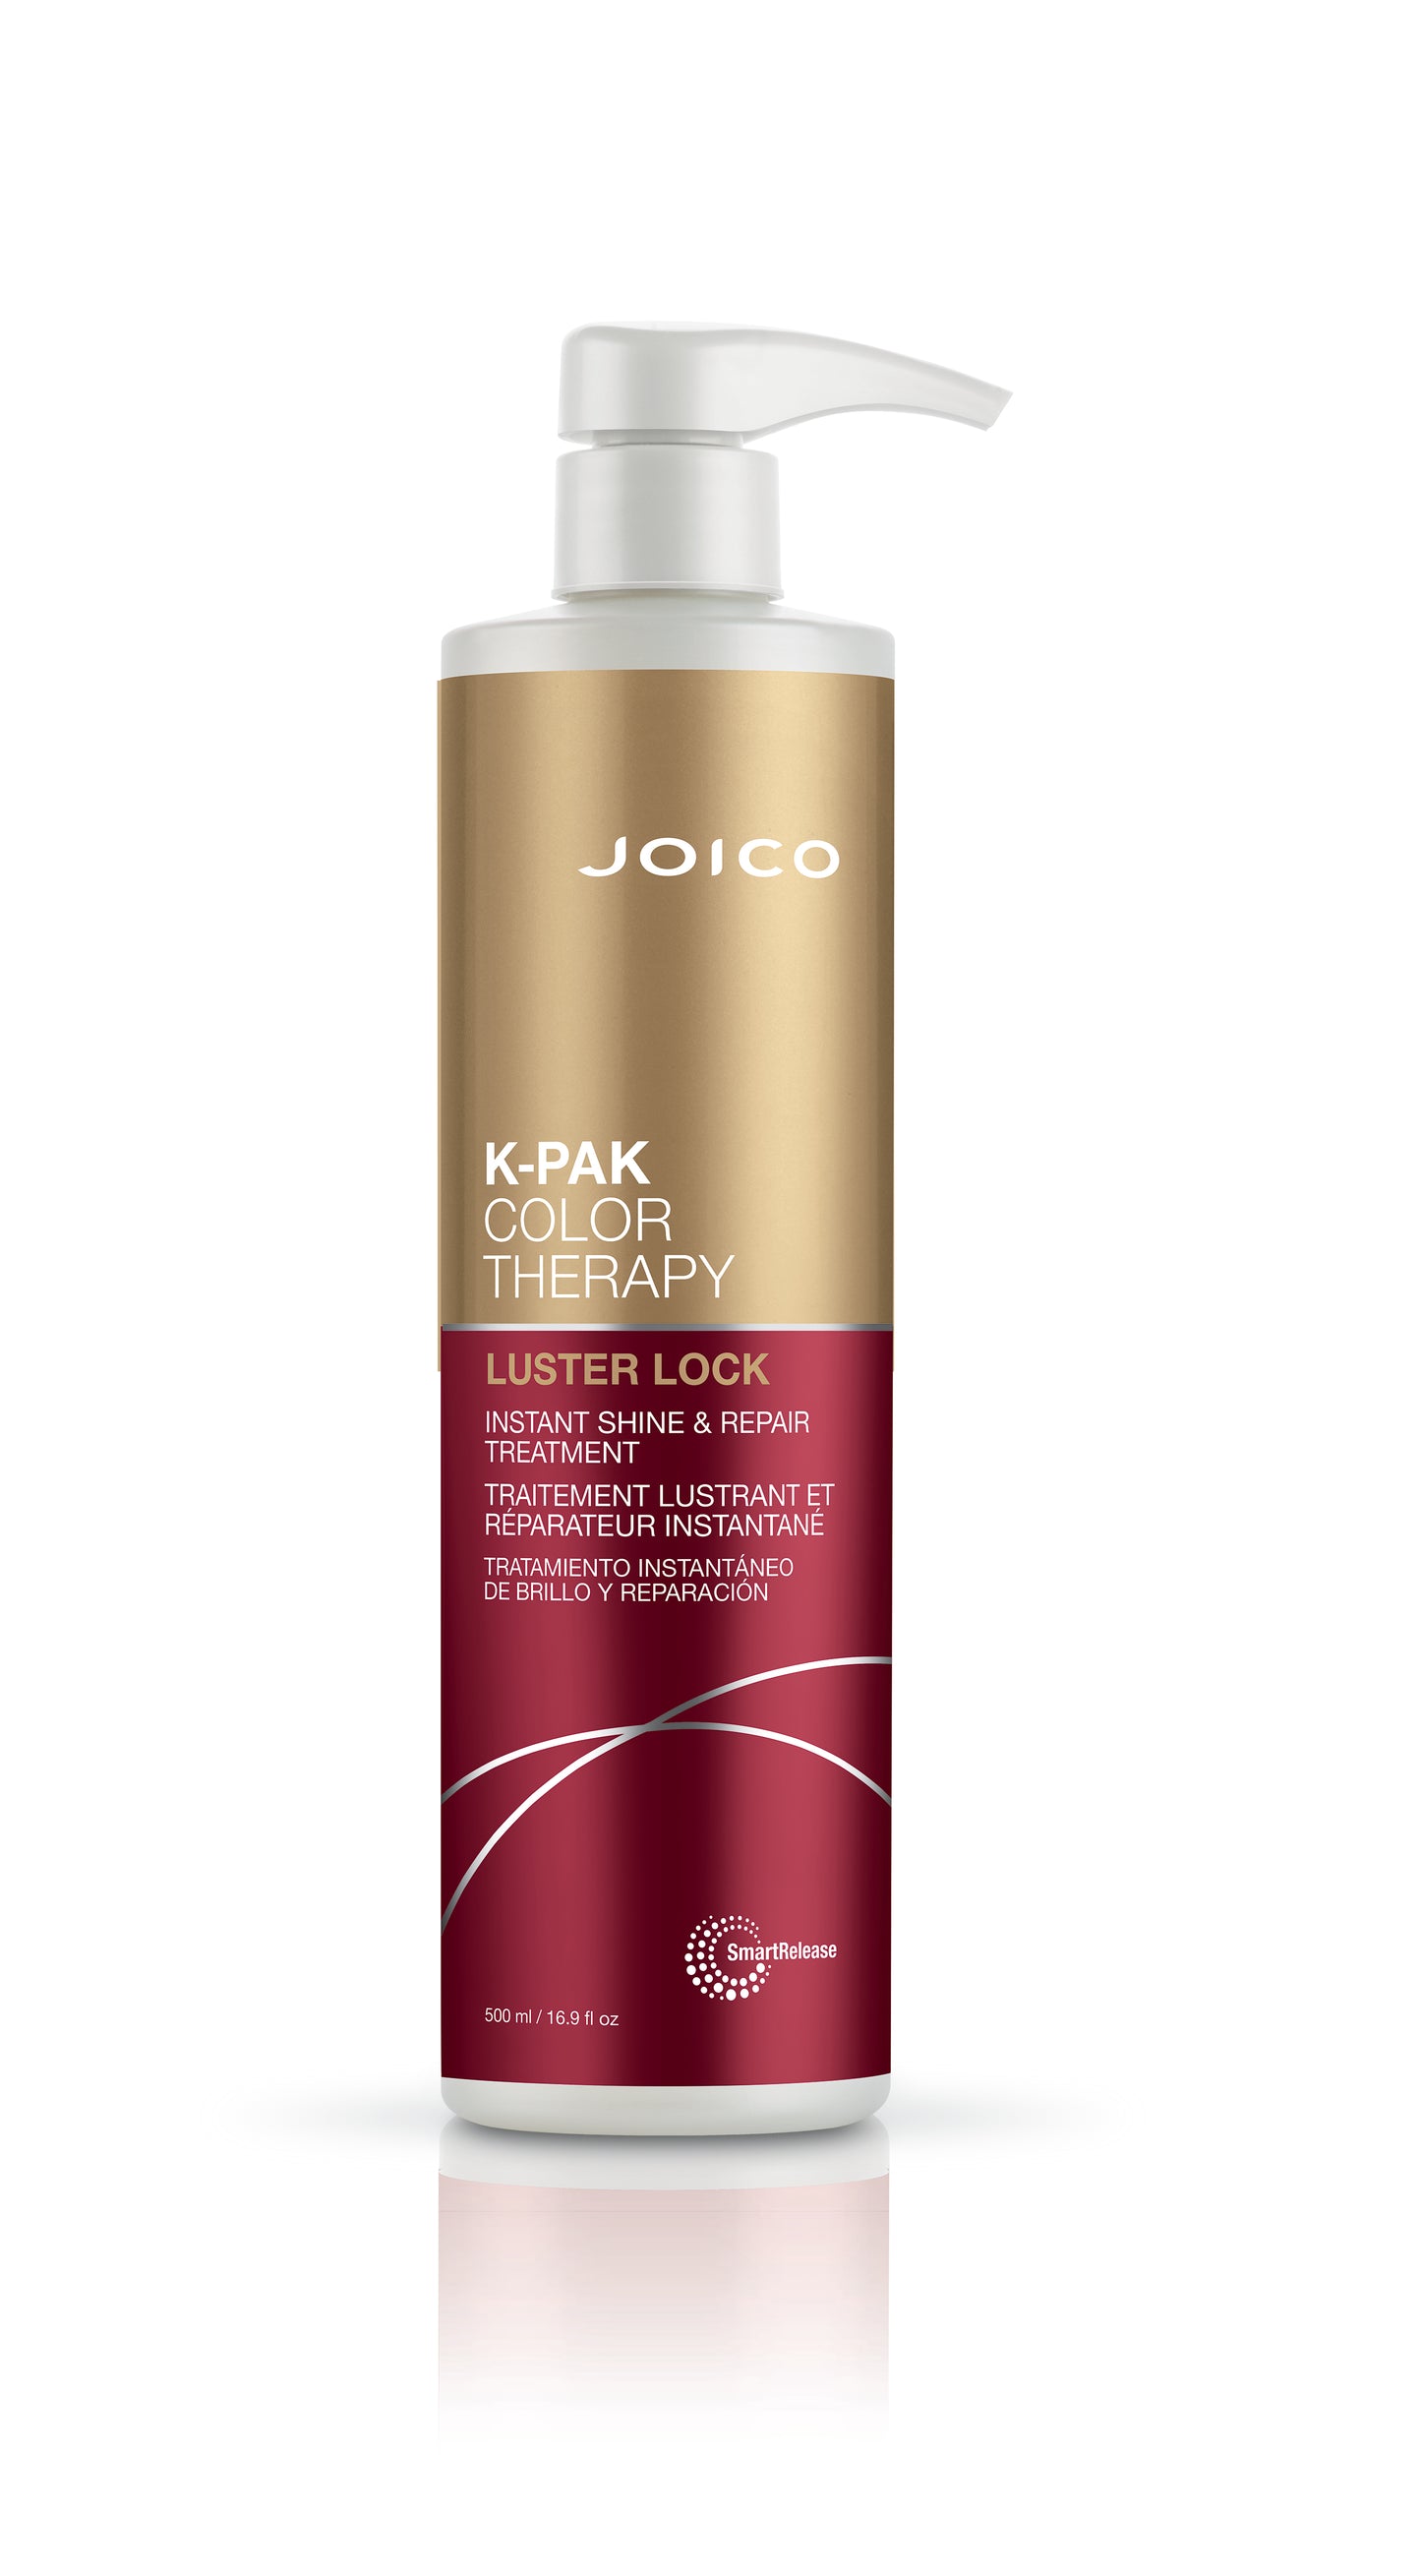 Trait Joico K-PAK Color Therapy Luster Lock 500ml